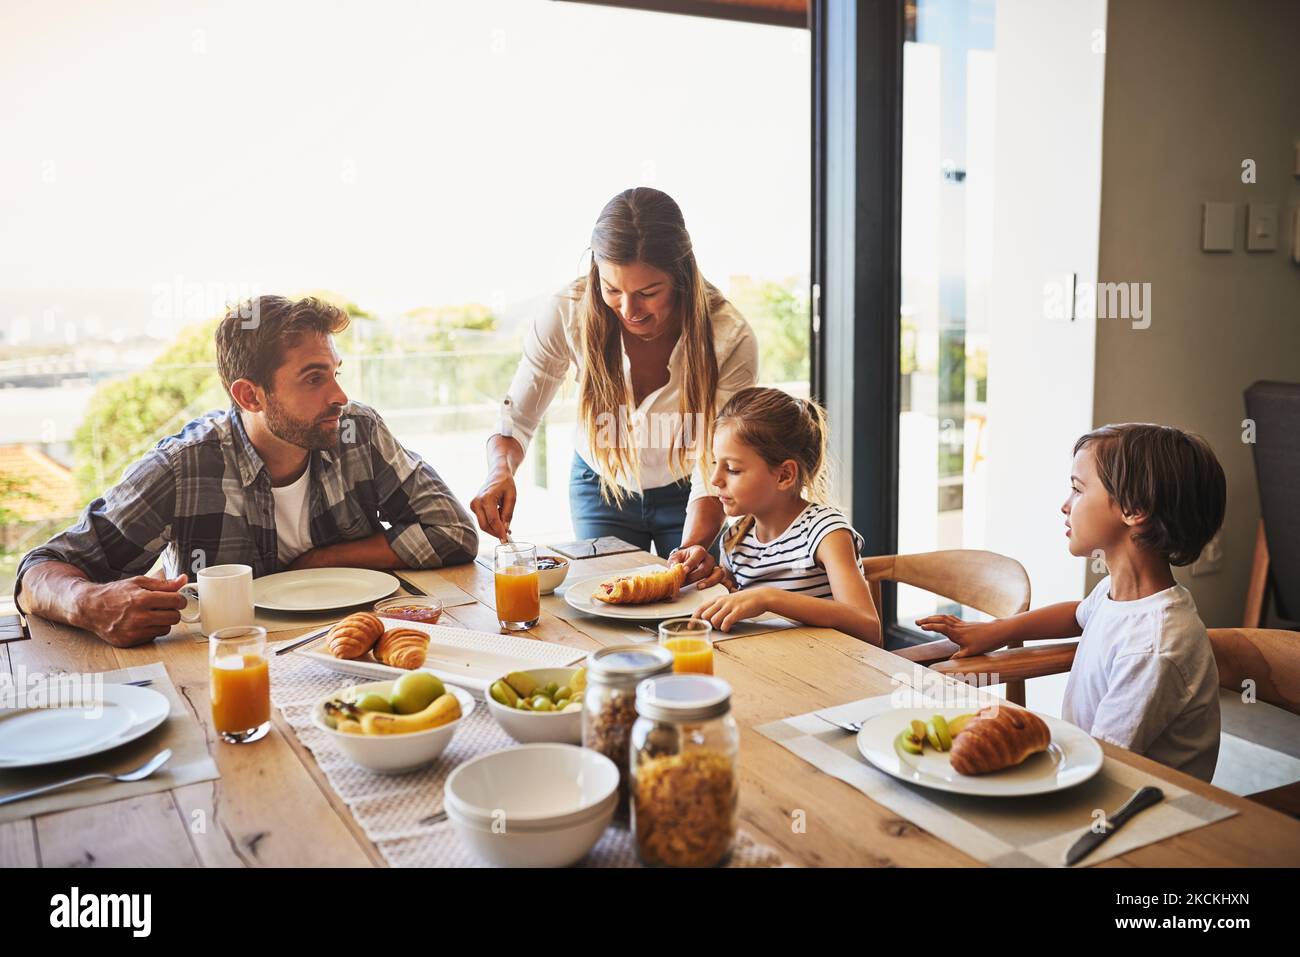 Starting their day together. a family having breakfast together at home. Stock Photo